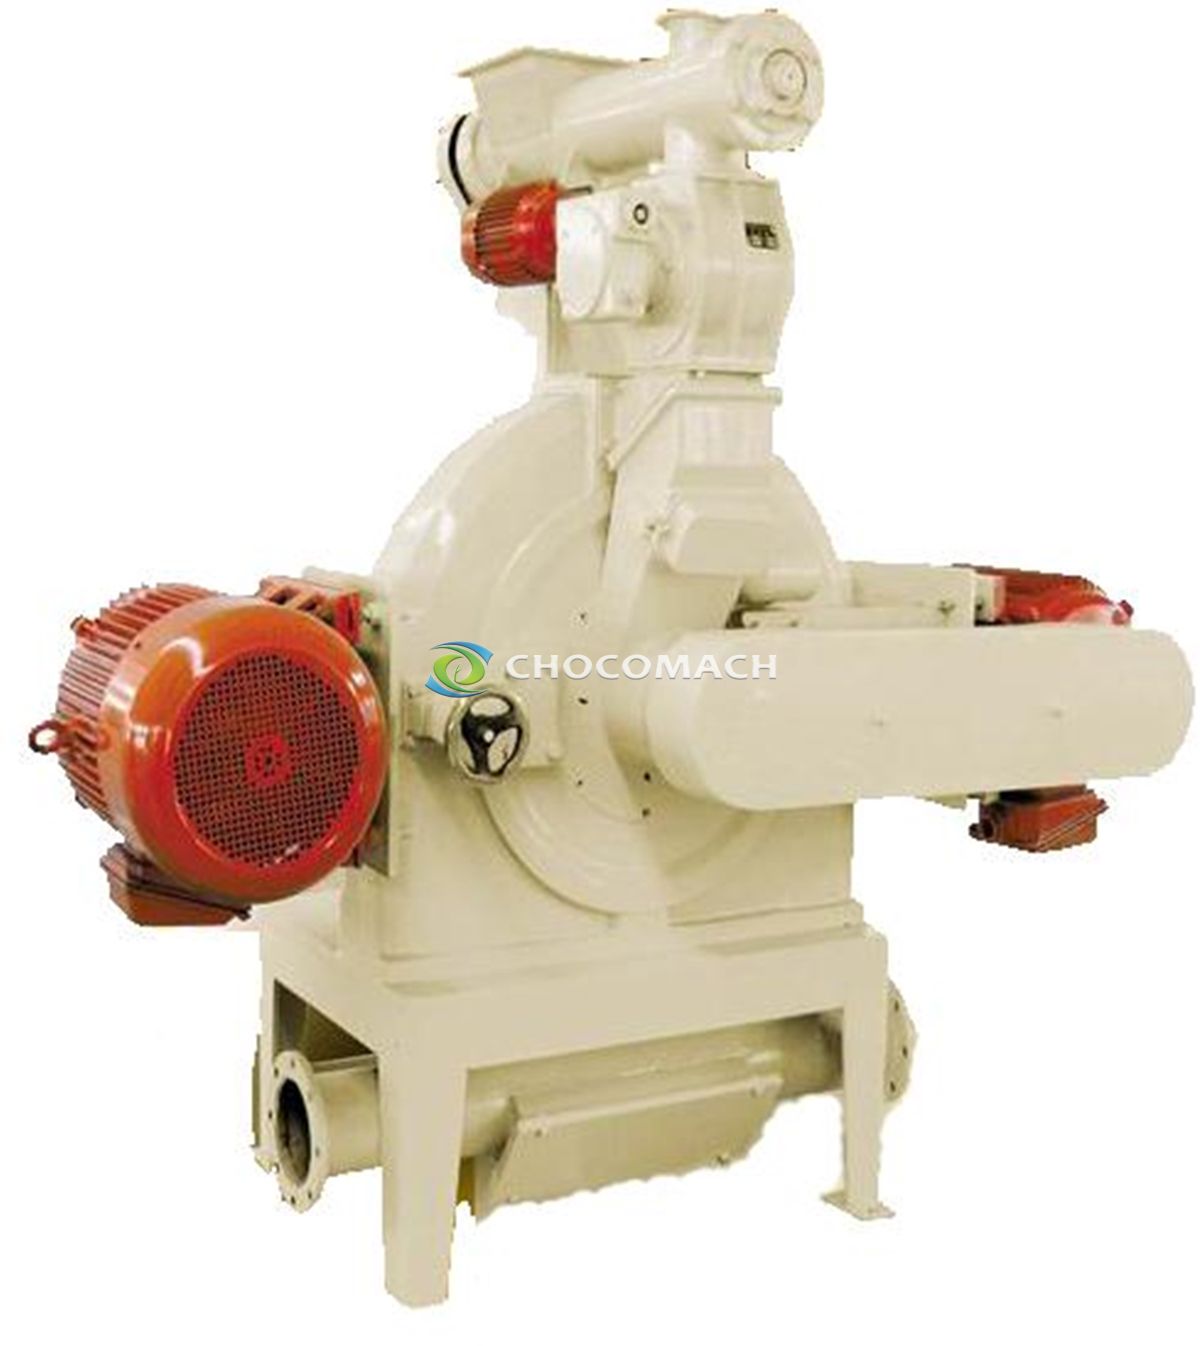 Cocoa Pre-refining Grinding Needle Mill